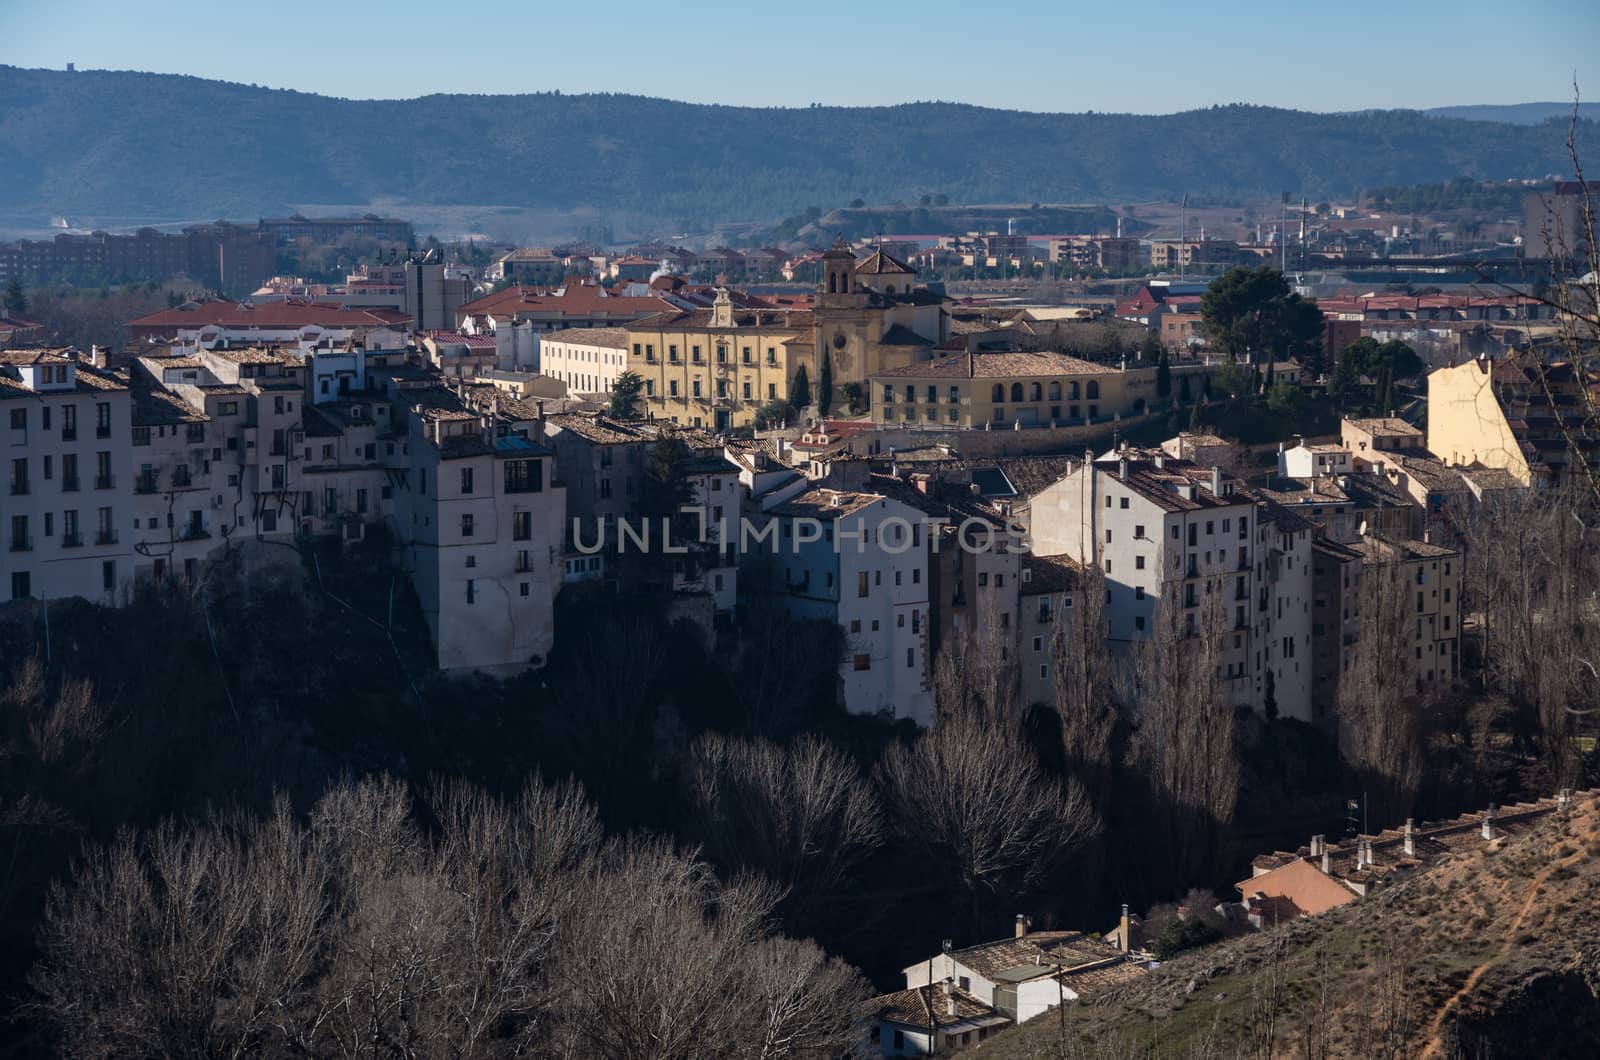 View to Cuenca old town. View from medieval part of city, built on the steep sides of a mountain. Cuenca, Spain